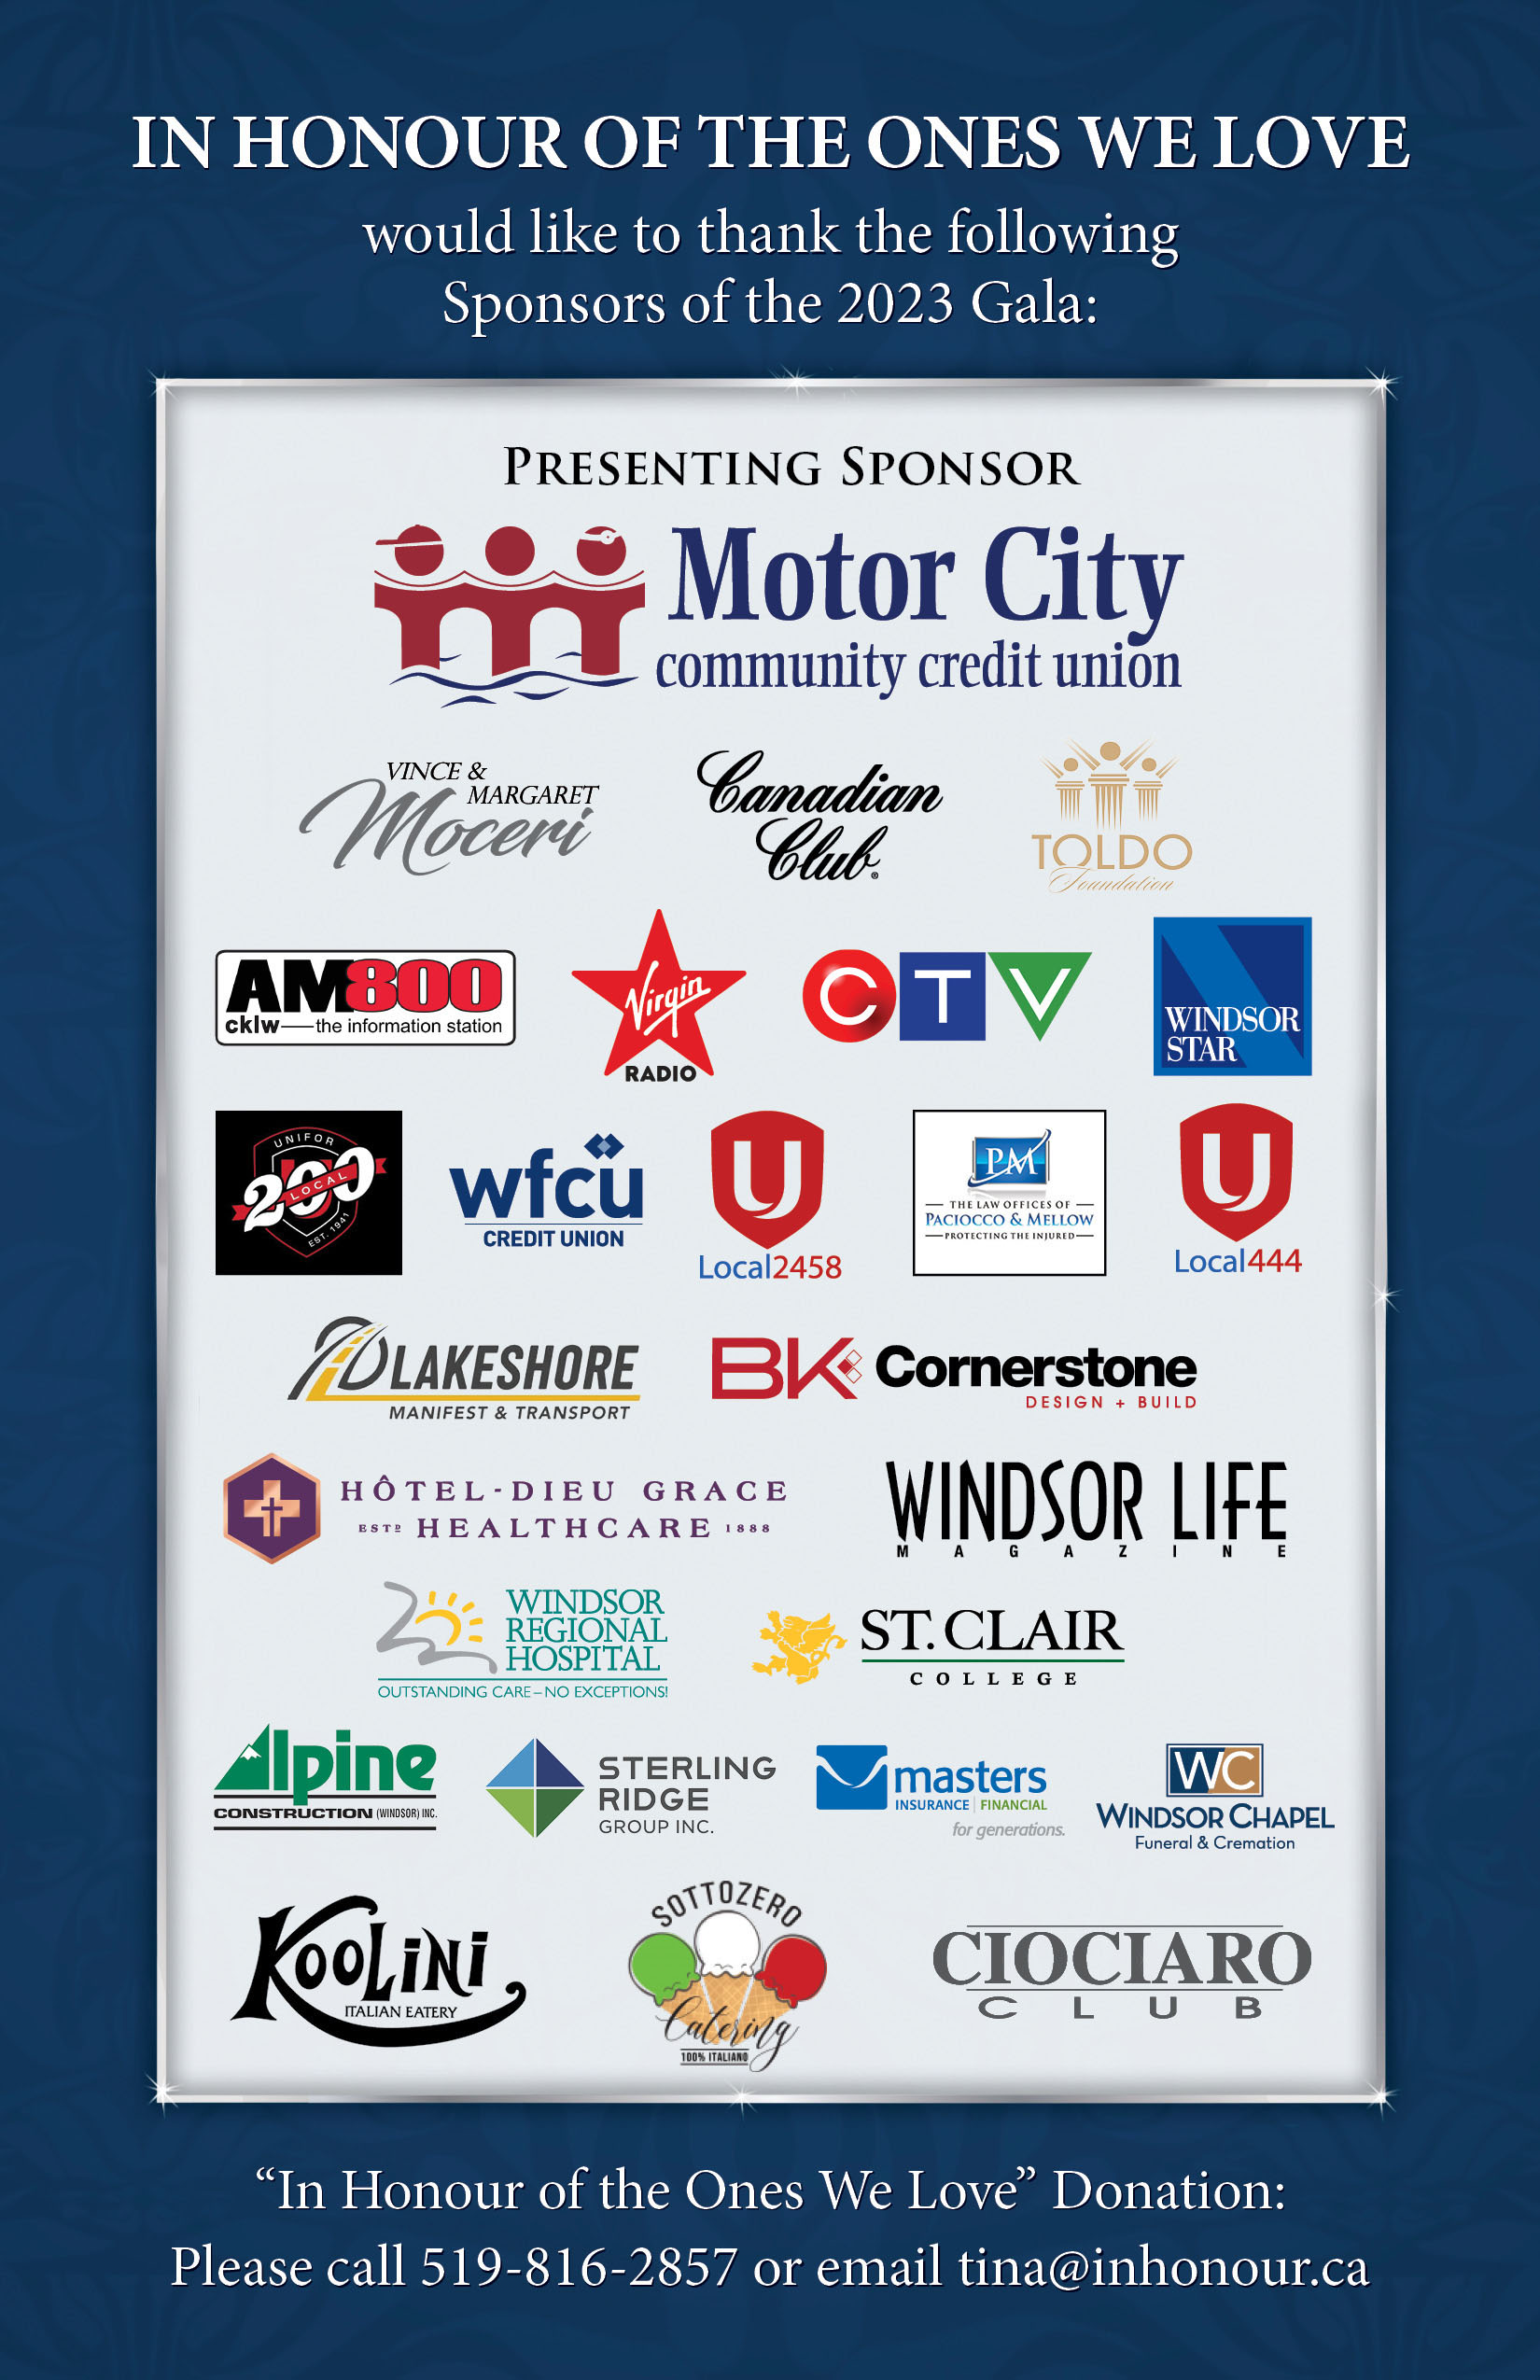 In Honour of the Ones We Love Would like to thank the sponsors of our 25th Anniversary Gala 